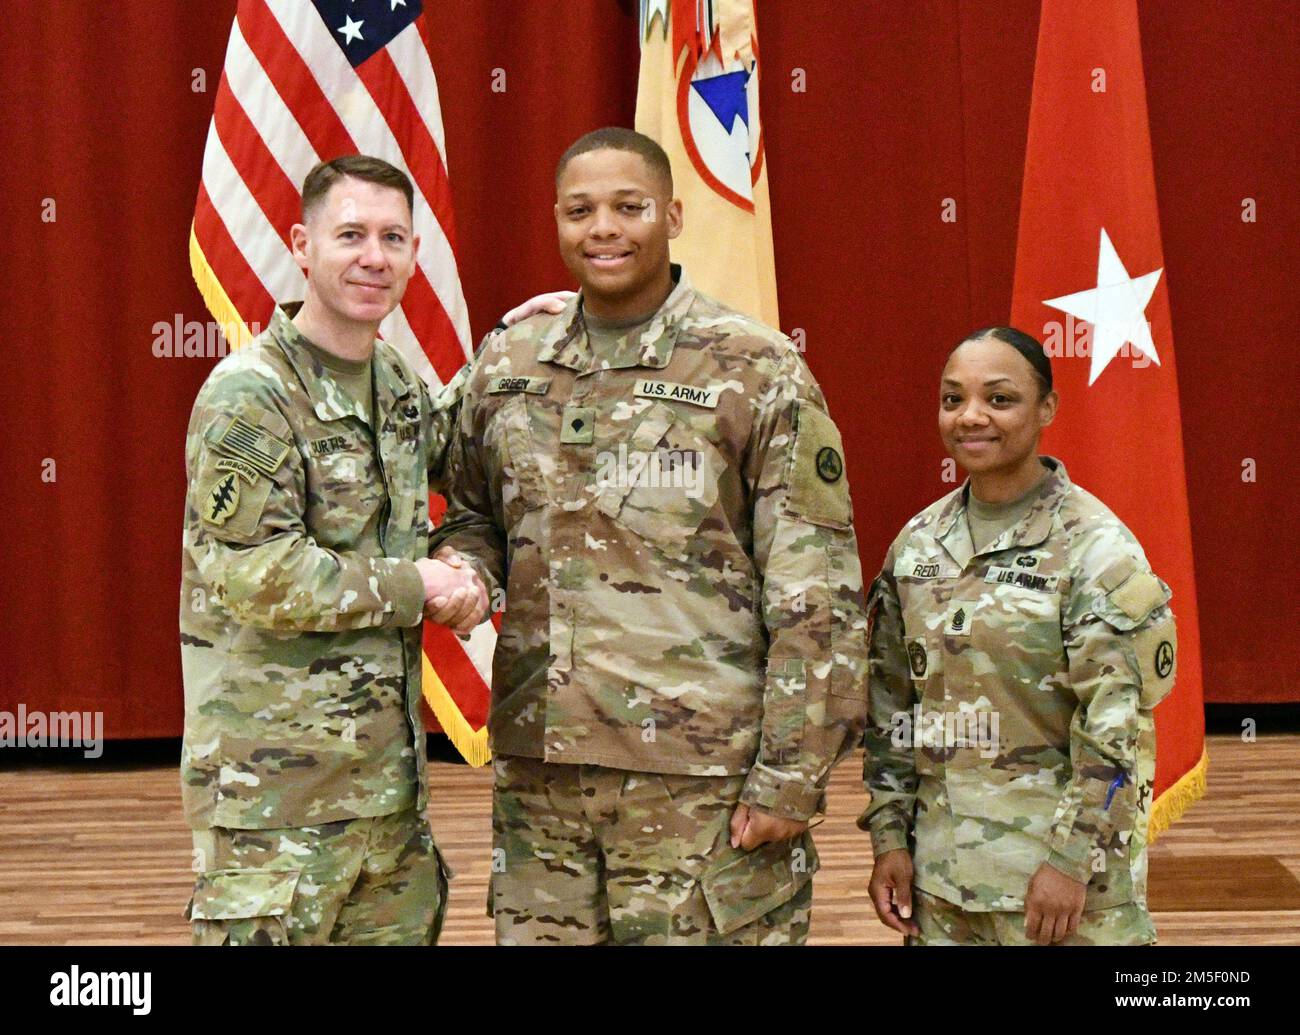 Brig. Gen. Lance G. Curtis, deputy commanding general, 1st Theater Sustainment Command, and commanding general, 3rd Expeditionary Sustainment Command, and Command Sgt. Maj. Phelicea M. Redd, senior enlisted advisor, 1st TSC operational command post and 3rd ESC, pose with Spc. Darius J. Green, an ammunition specialist assigned to 3rd ESC, after presenting him a Shoulder Sleeve Insignia-Former Wartime Service patch during a patching ceremony at Camp Arifjan, Kuwait, Mar. 9, 2022. Curtis and Redd presented patches to more than 20 “Spears Ready” Soldiers for their service in designated combat zone Stock Photo